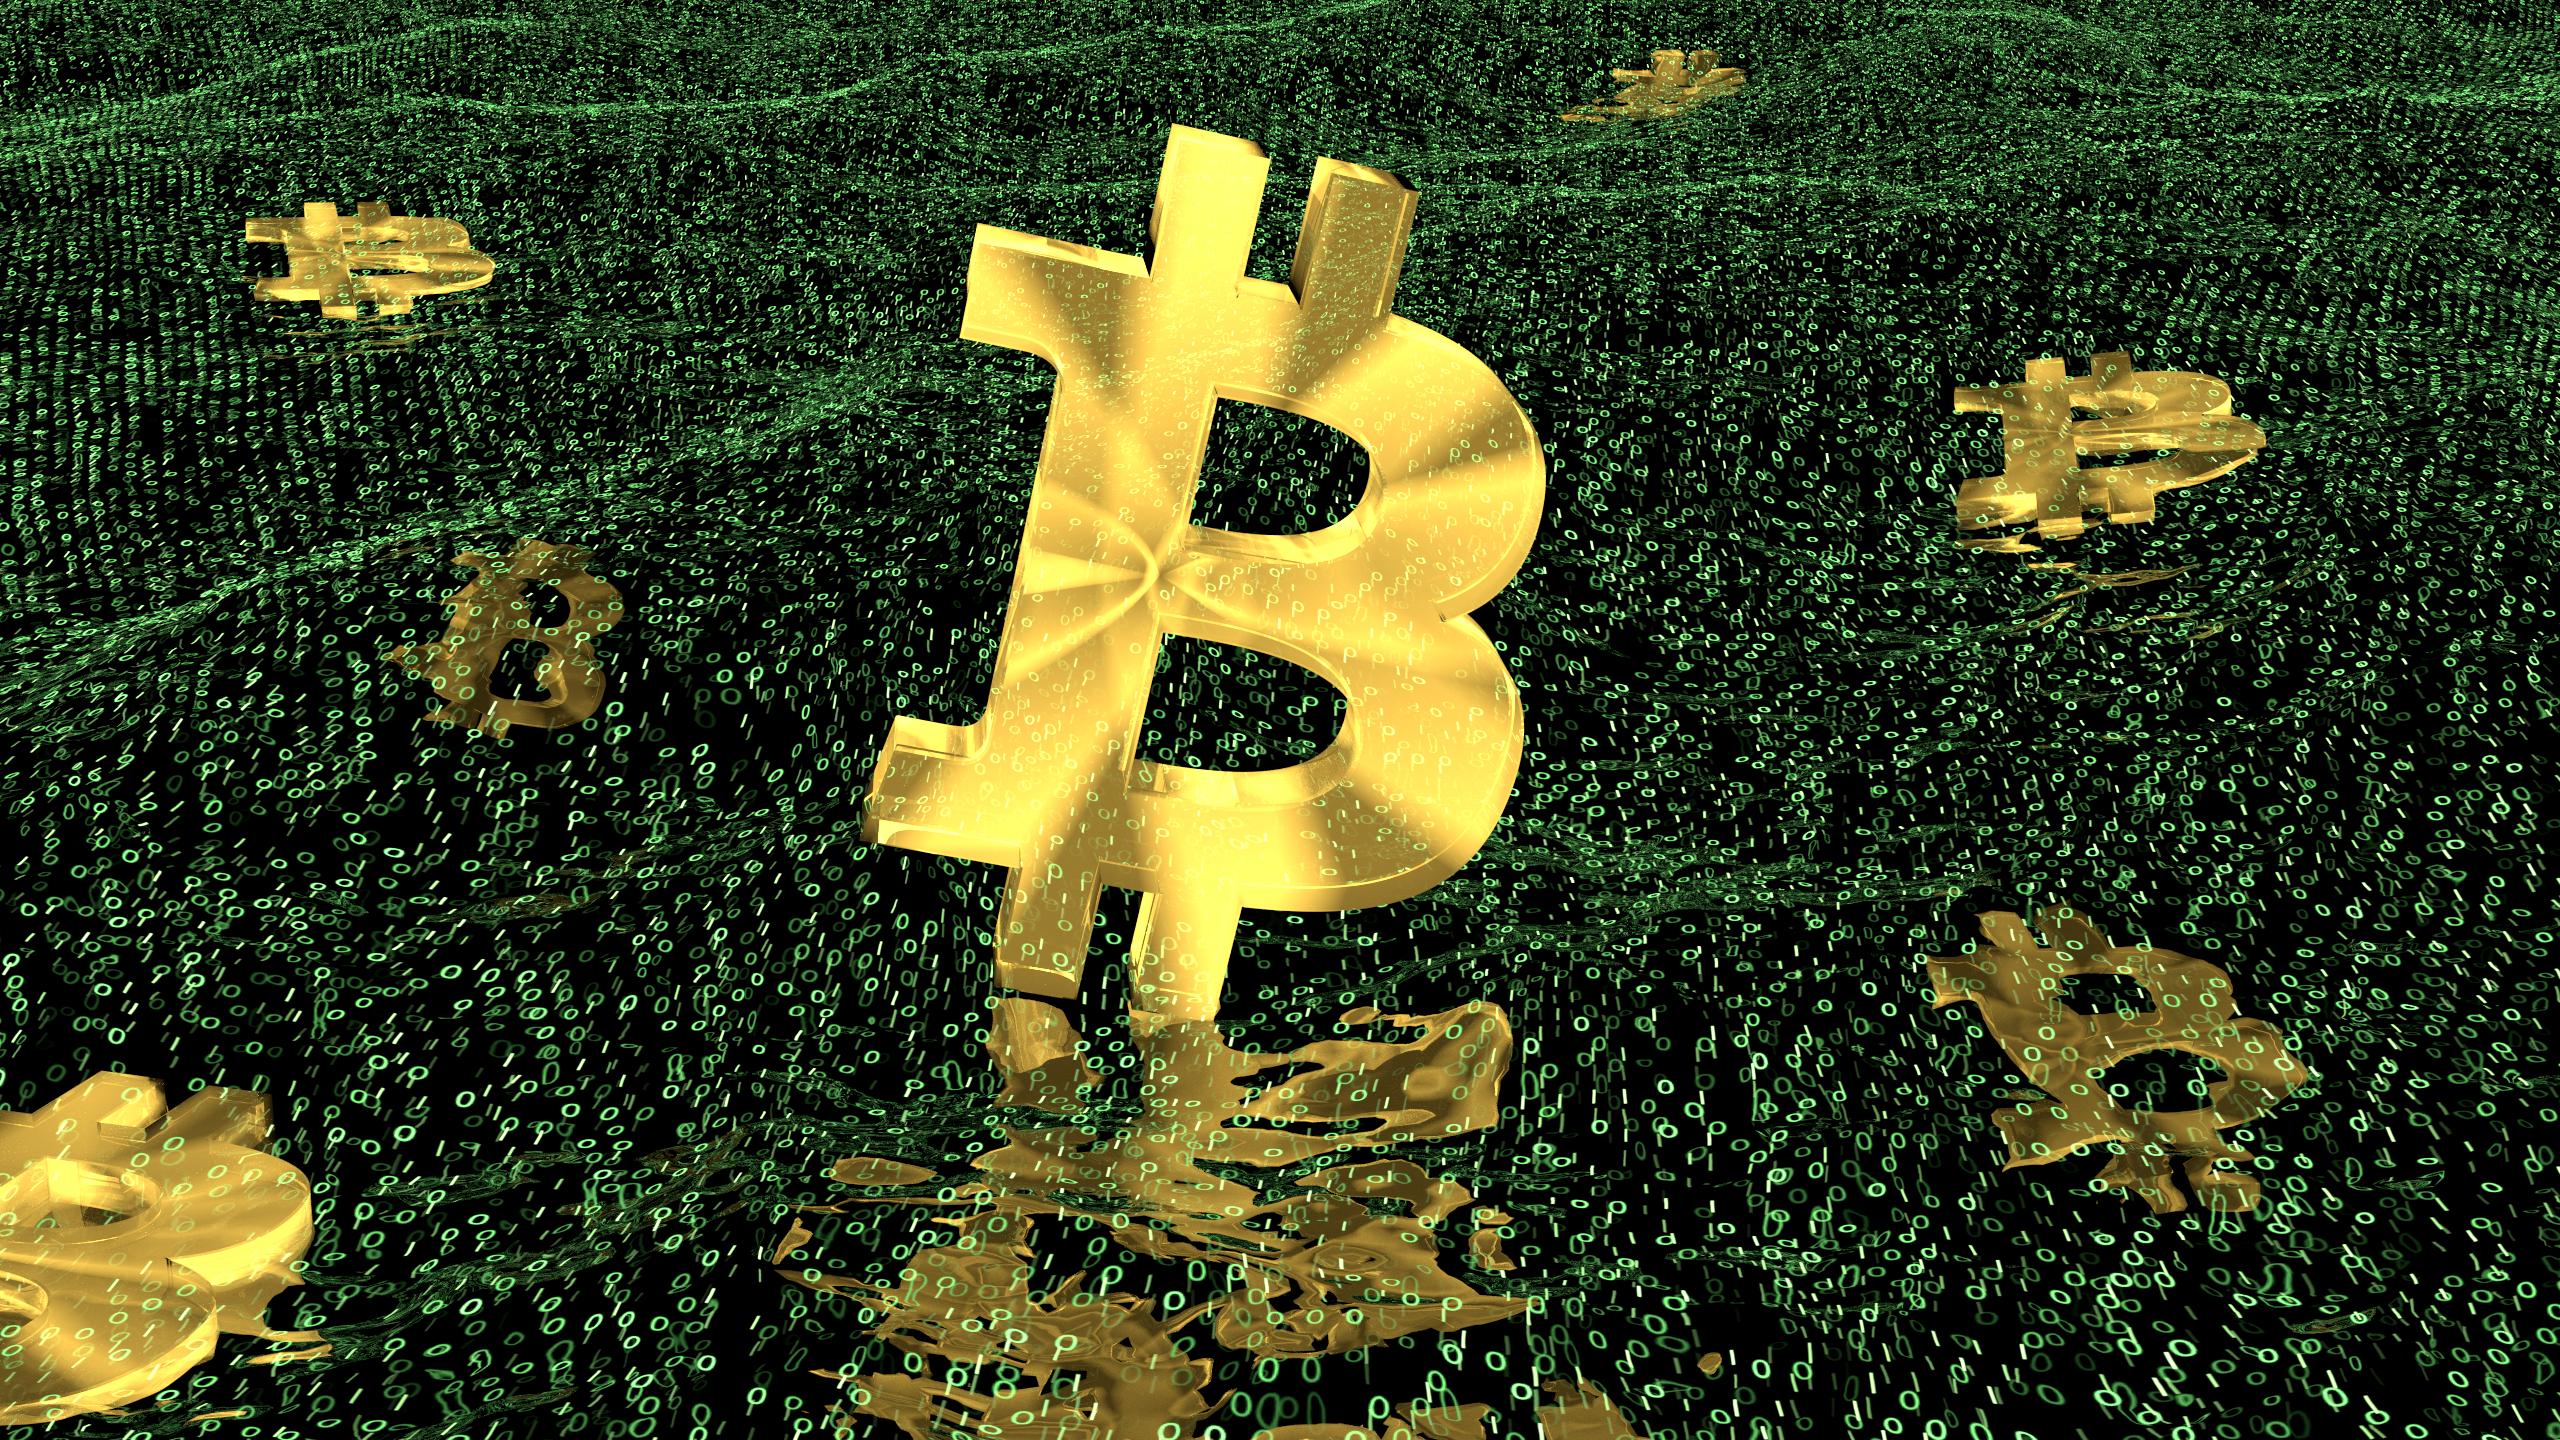 Bitcoin 3D renders to use as wallpaper, for promotion, or